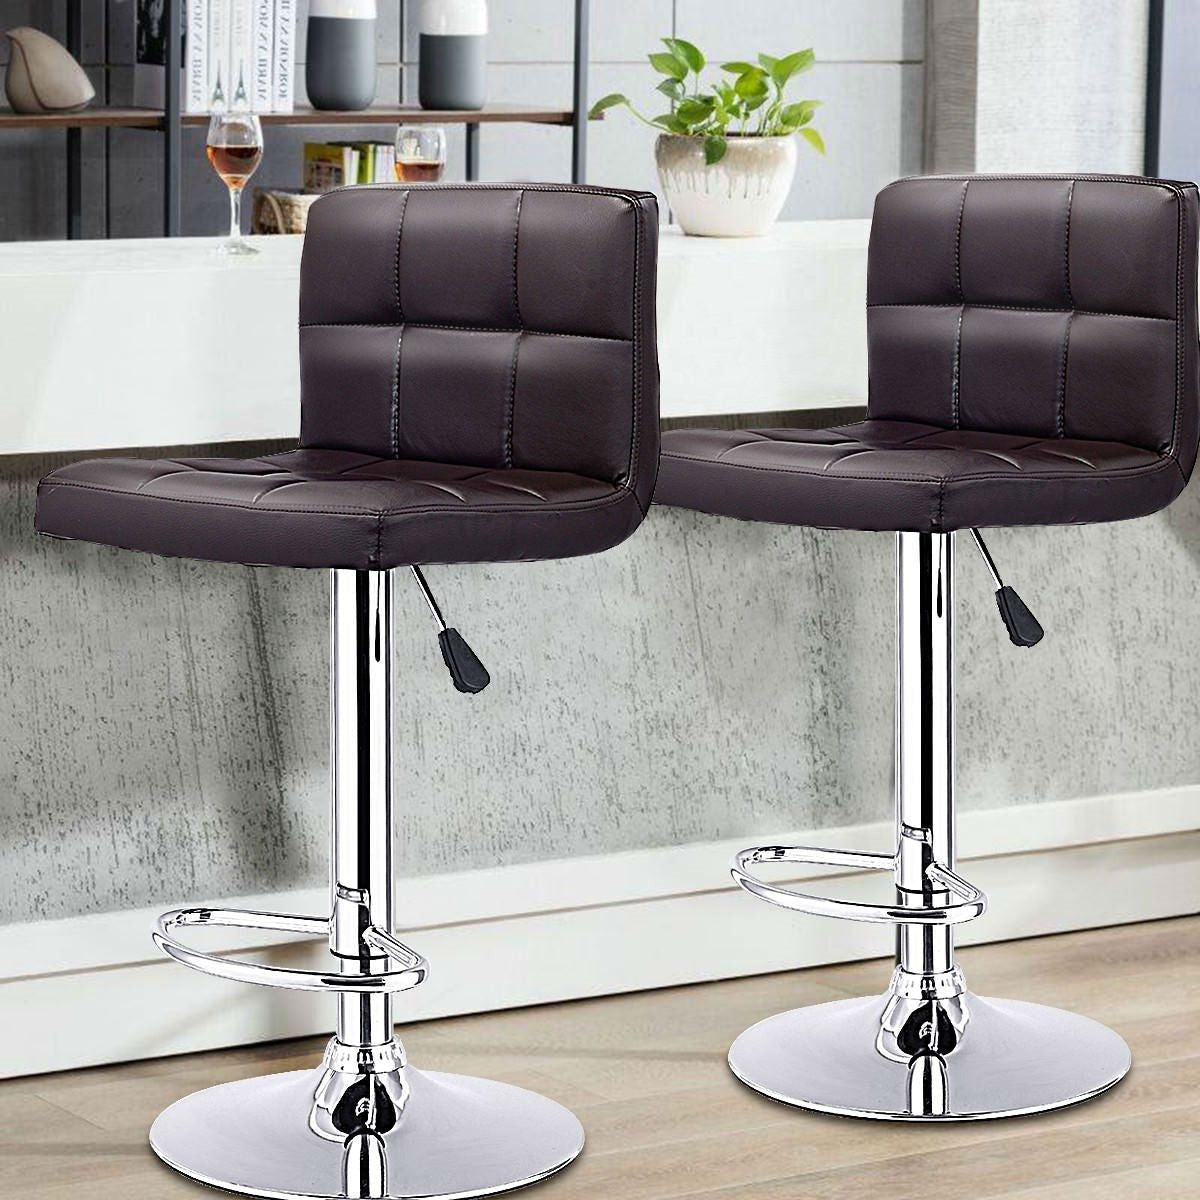 Dining > Barstools - Set Of 2 Brown Faux Leather Swivel Bar Stools Pub Chairs